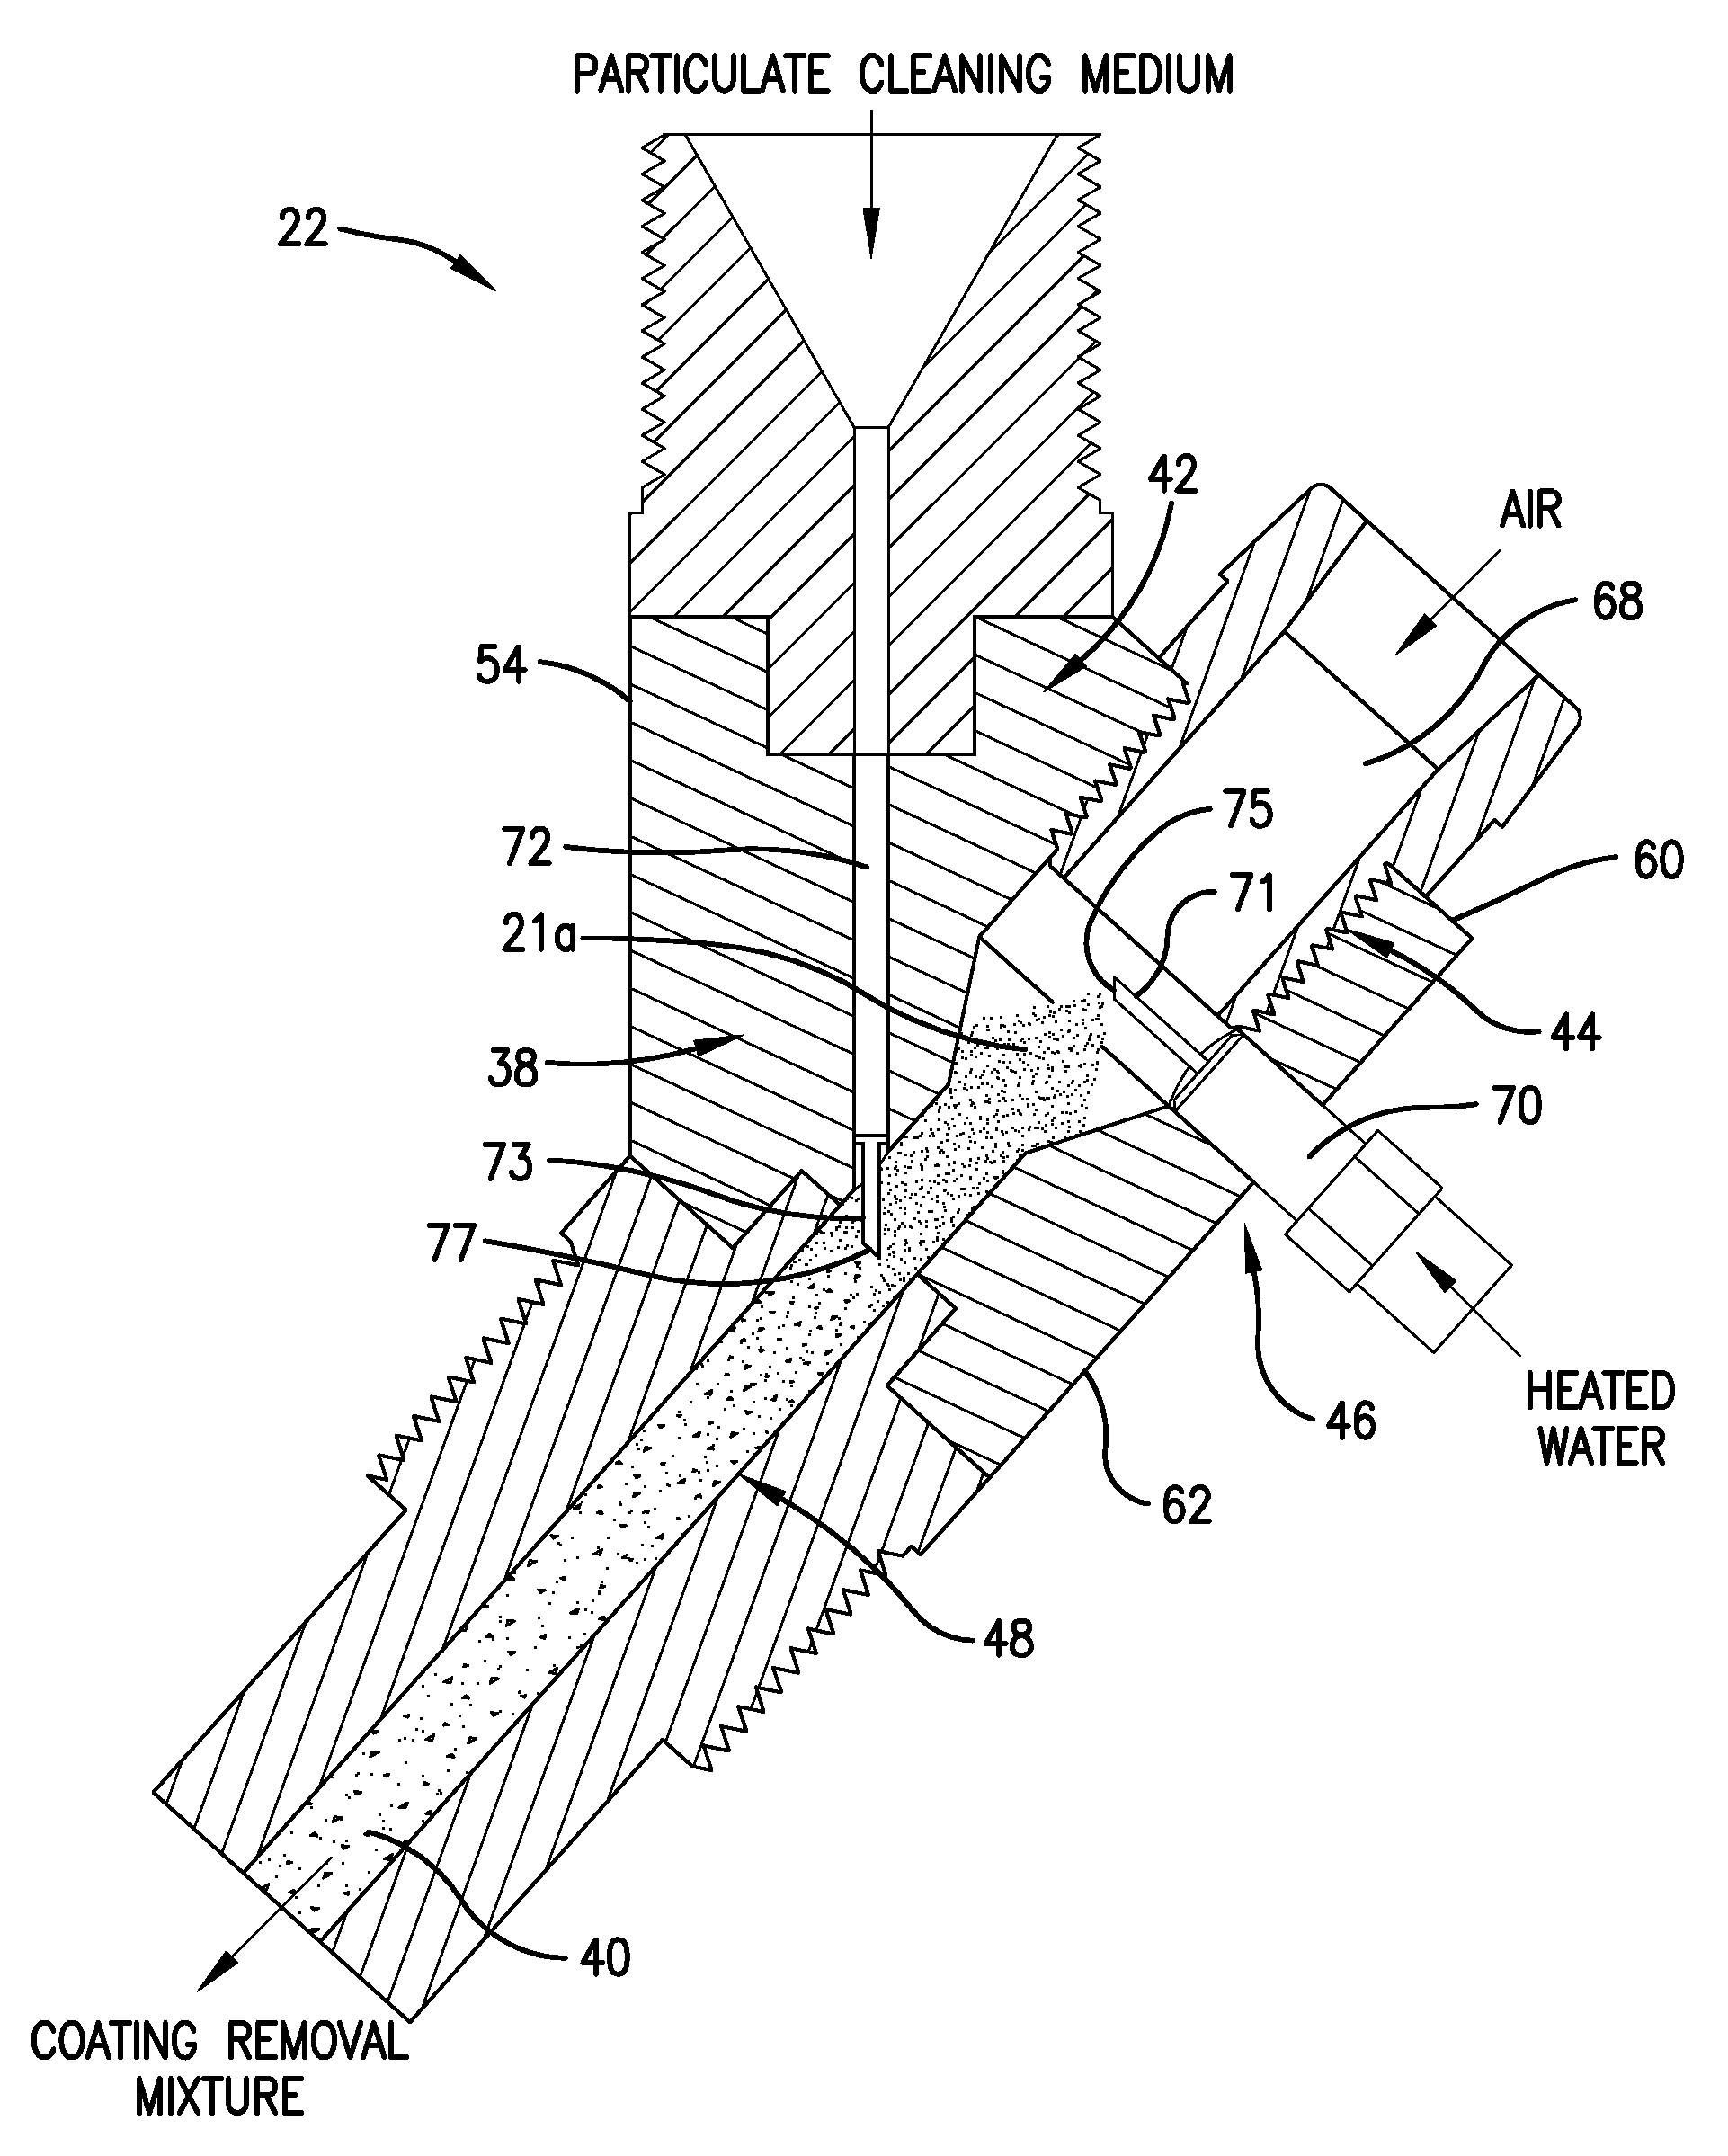 System and method for removing a coating from a substrate